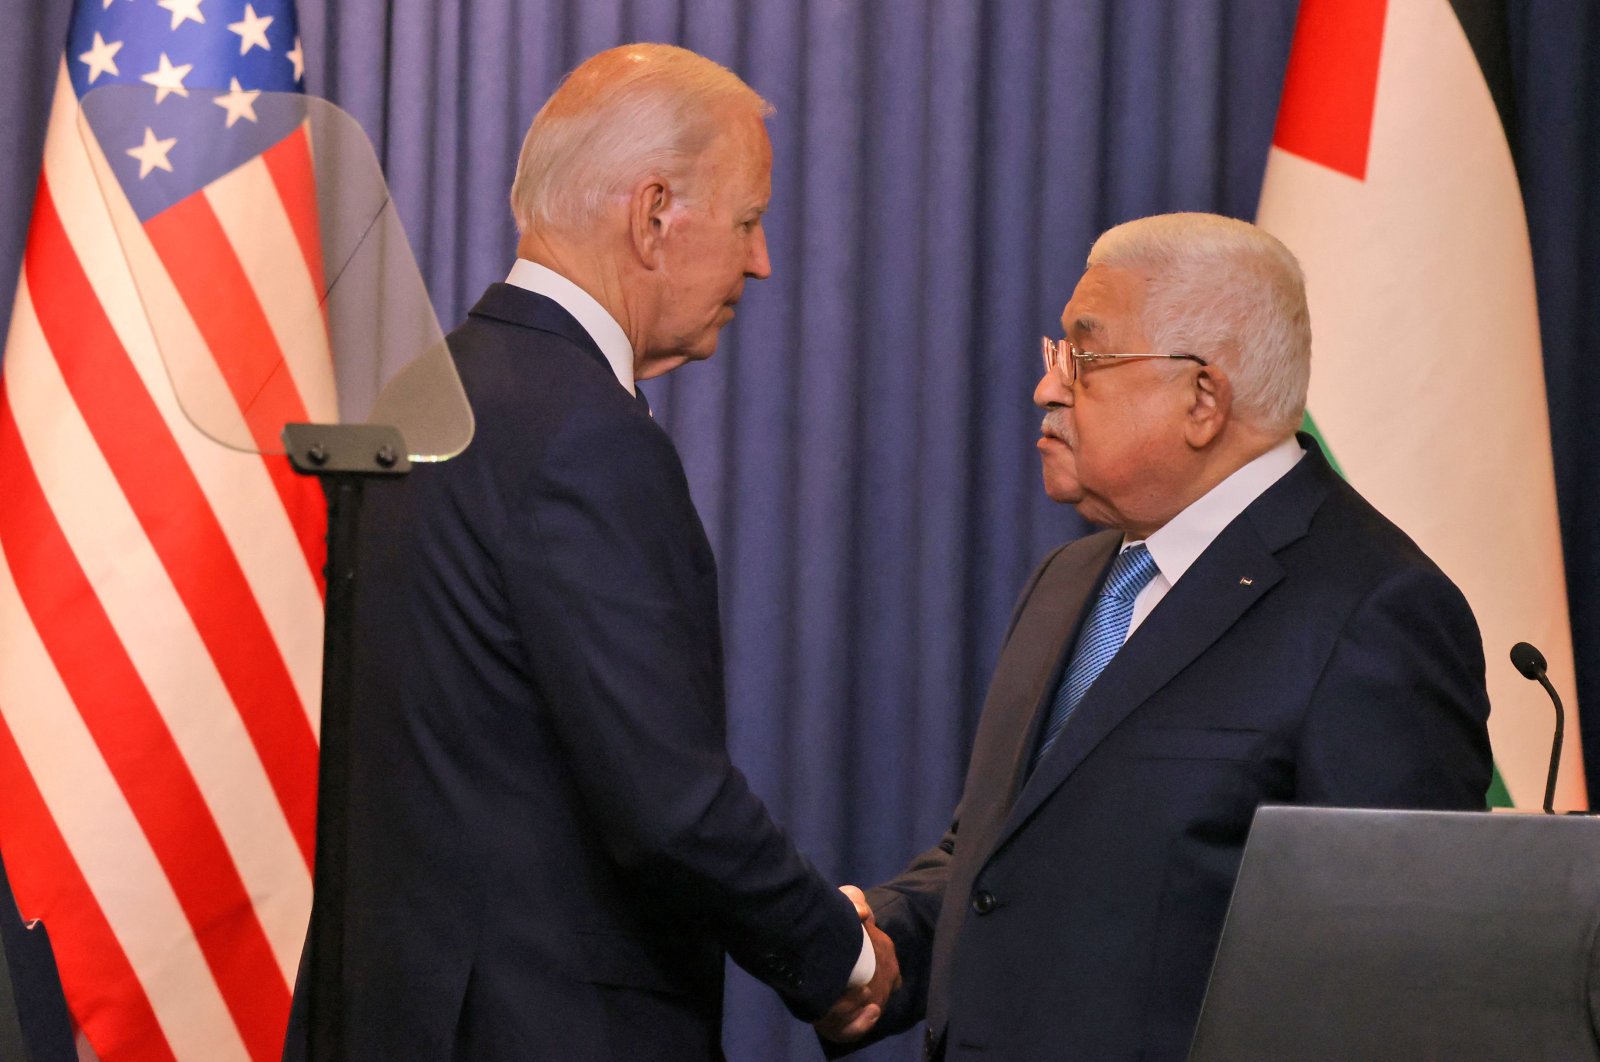 U.S. President Joe Biden (L) and Palestinian President Mahmoud Abbas shake hands after their statements to the media at the Muqataa Presidential Compound in the city of Bethlehem, in the occupied West Bank, Palestine, July 15, 2022. (AFP Photo)